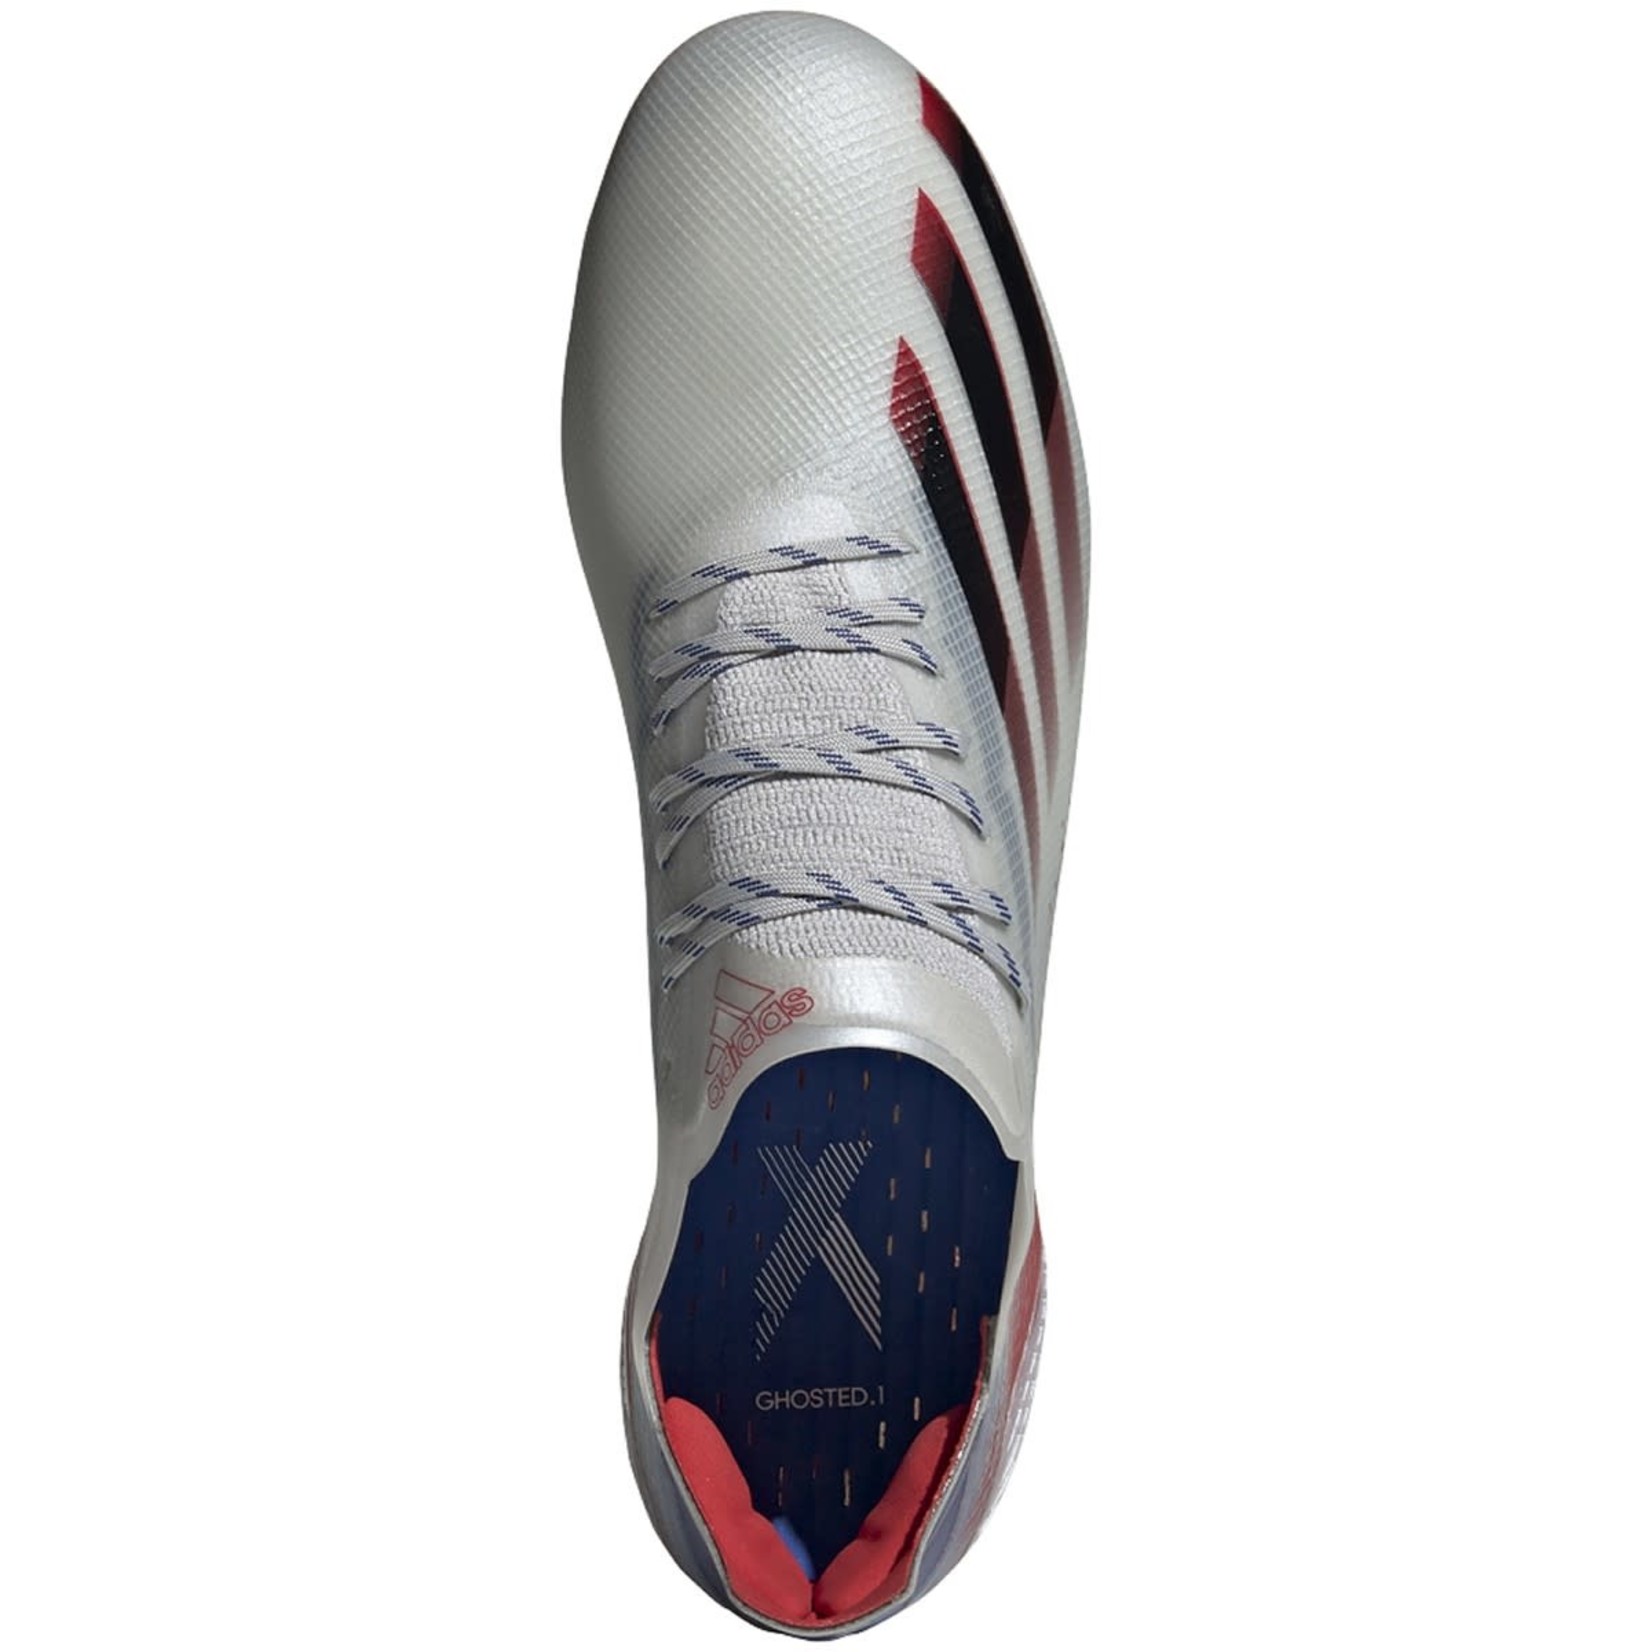 ADIDAS X GHOSTED.1 FG (SILVER/RED/BLUE)